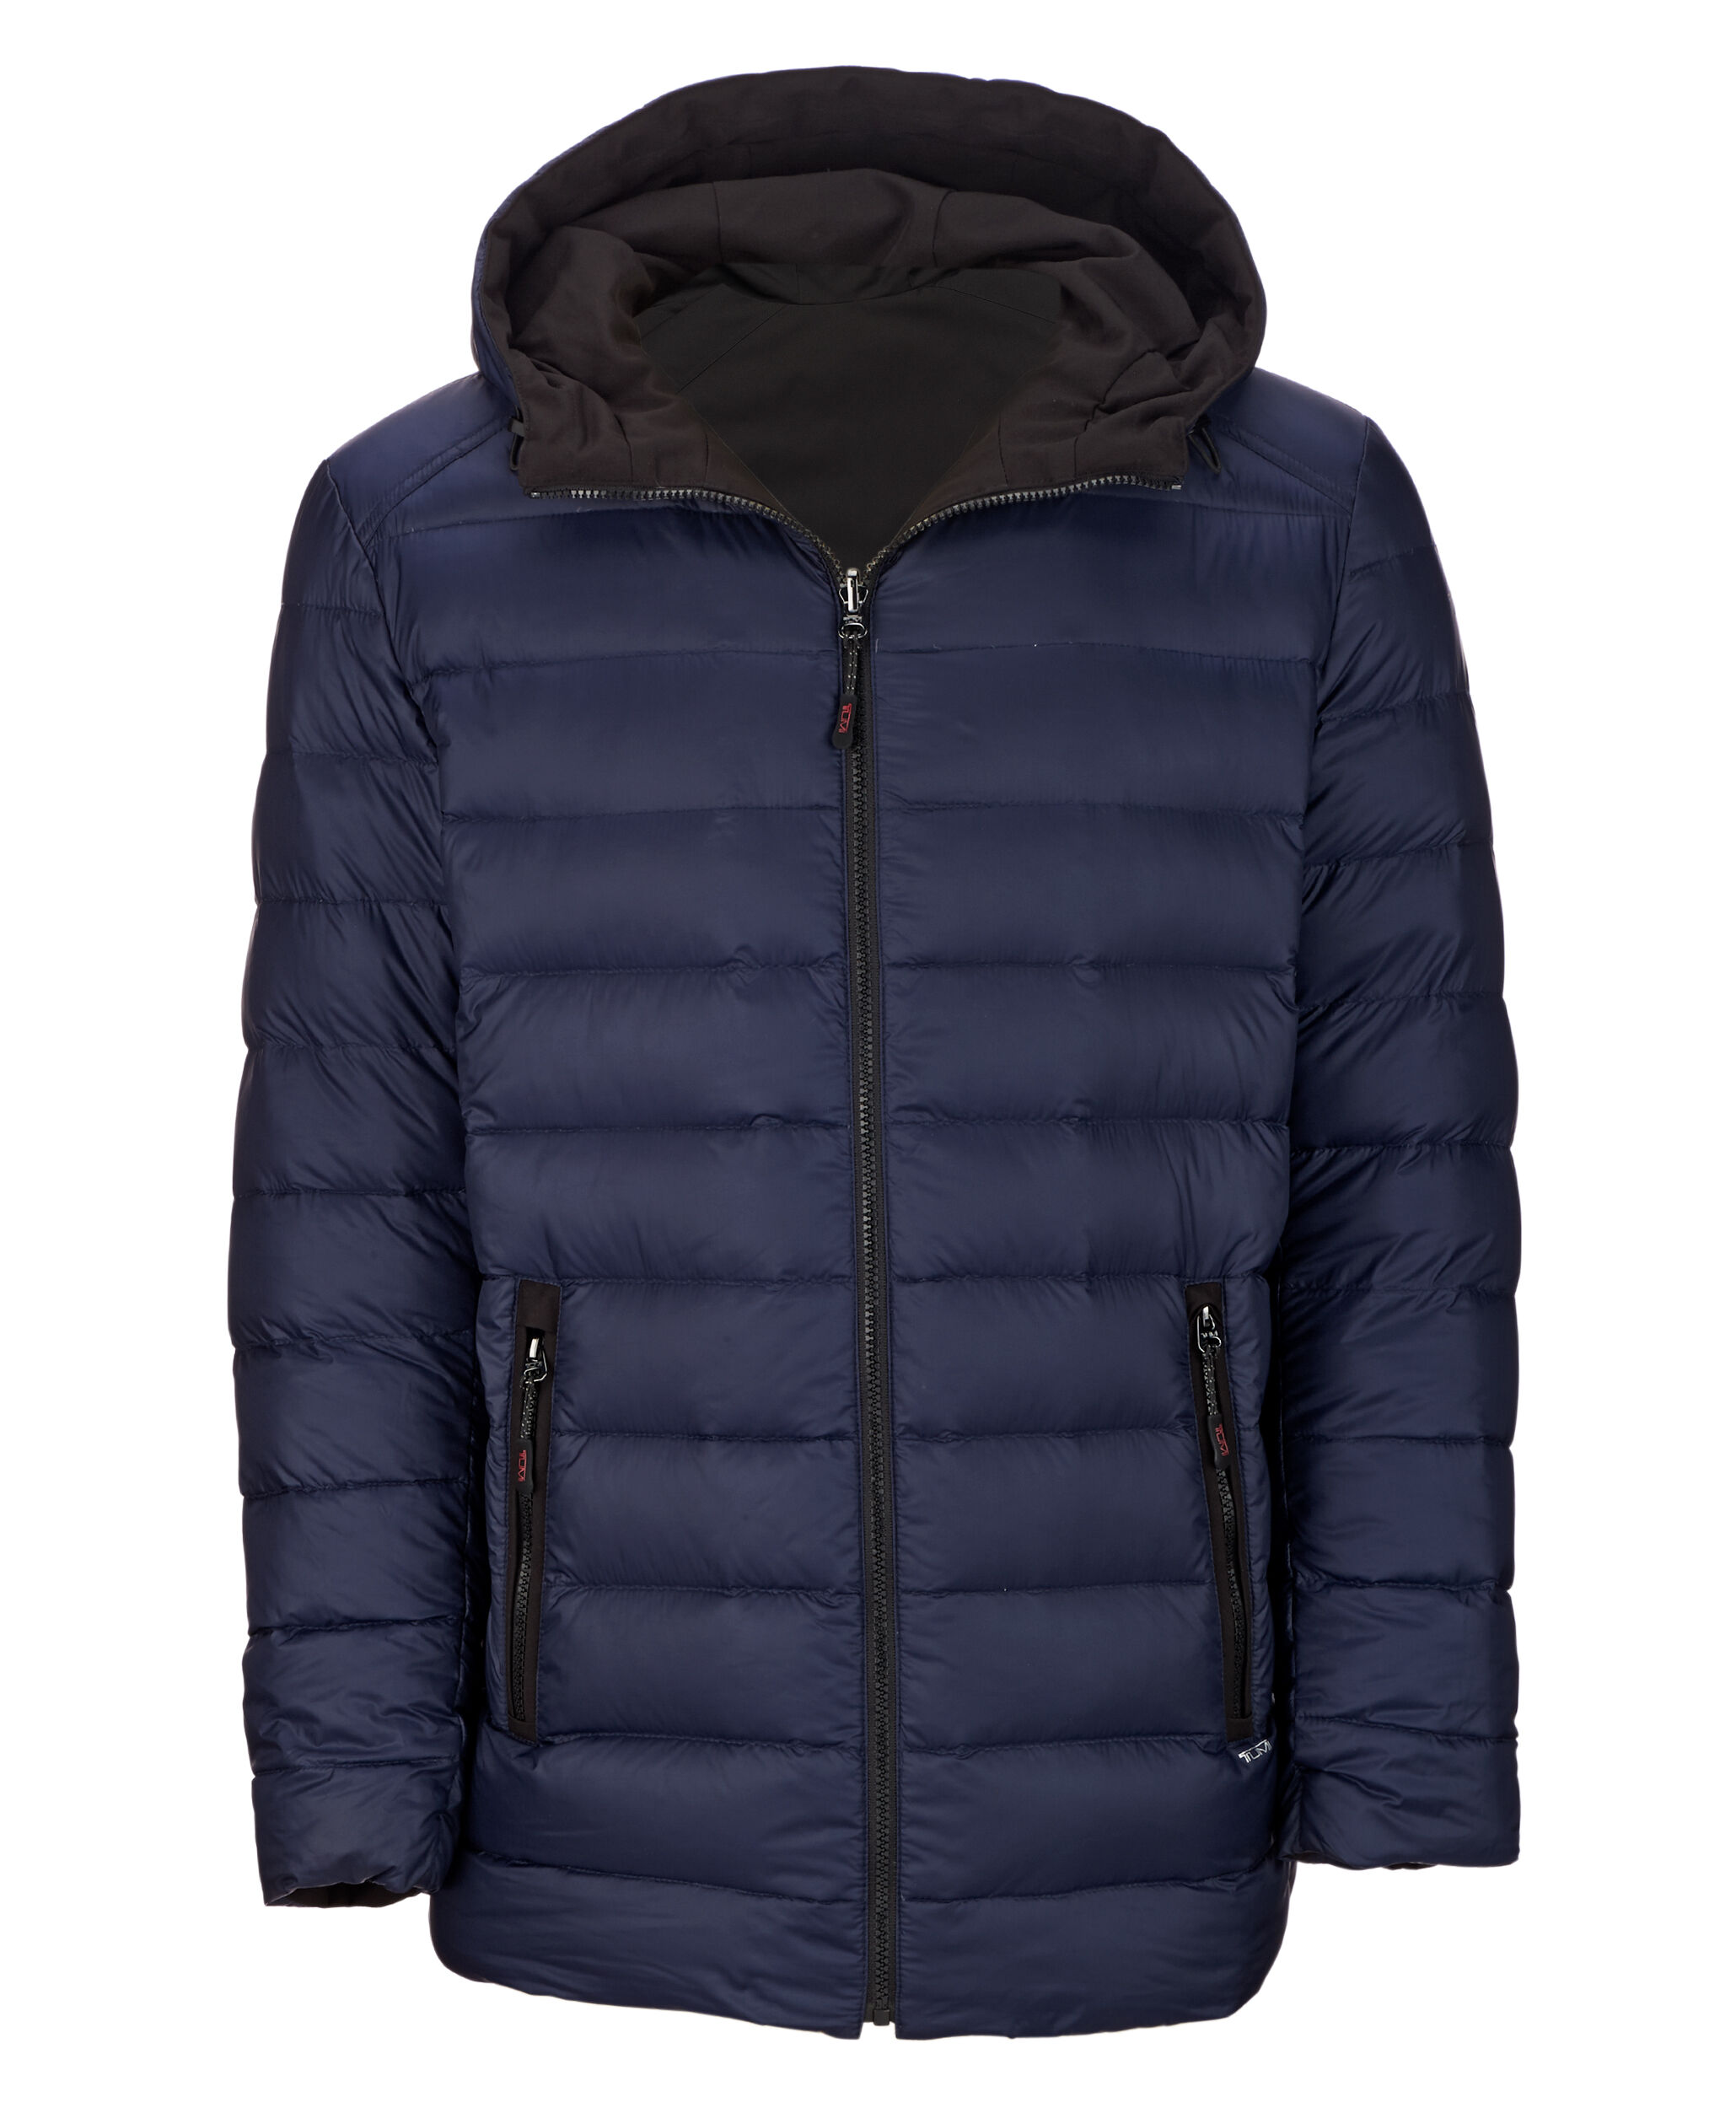 tumi packable jacket with hood